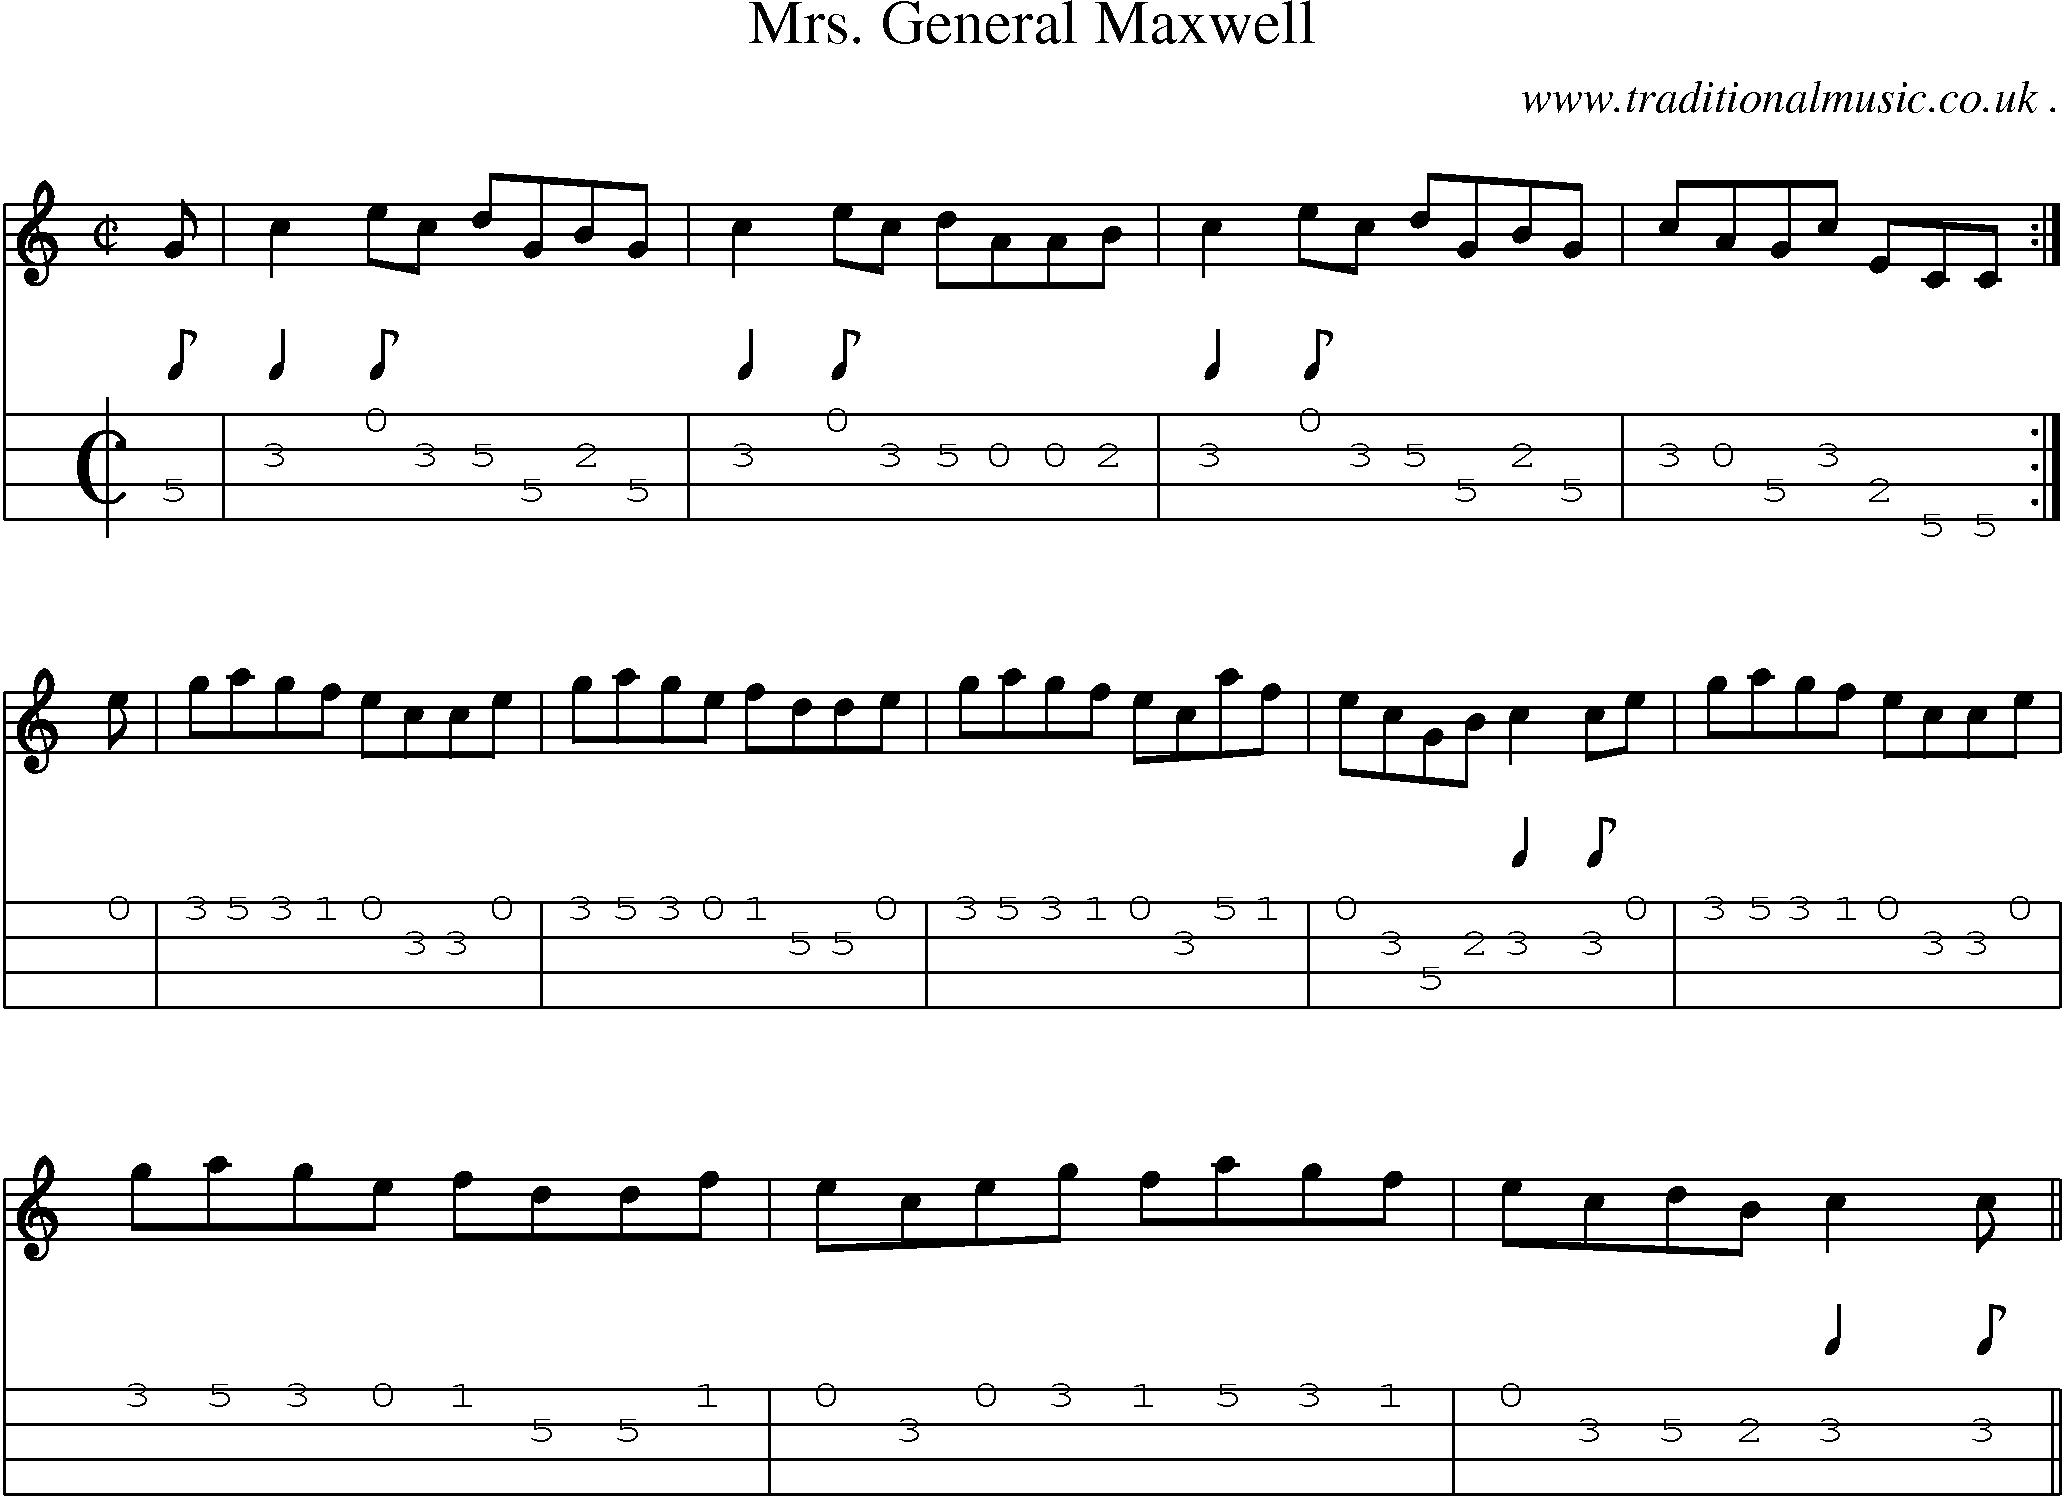 Sheet-music  score, Chords and Mandolin Tabs for Mrs General Maxwell